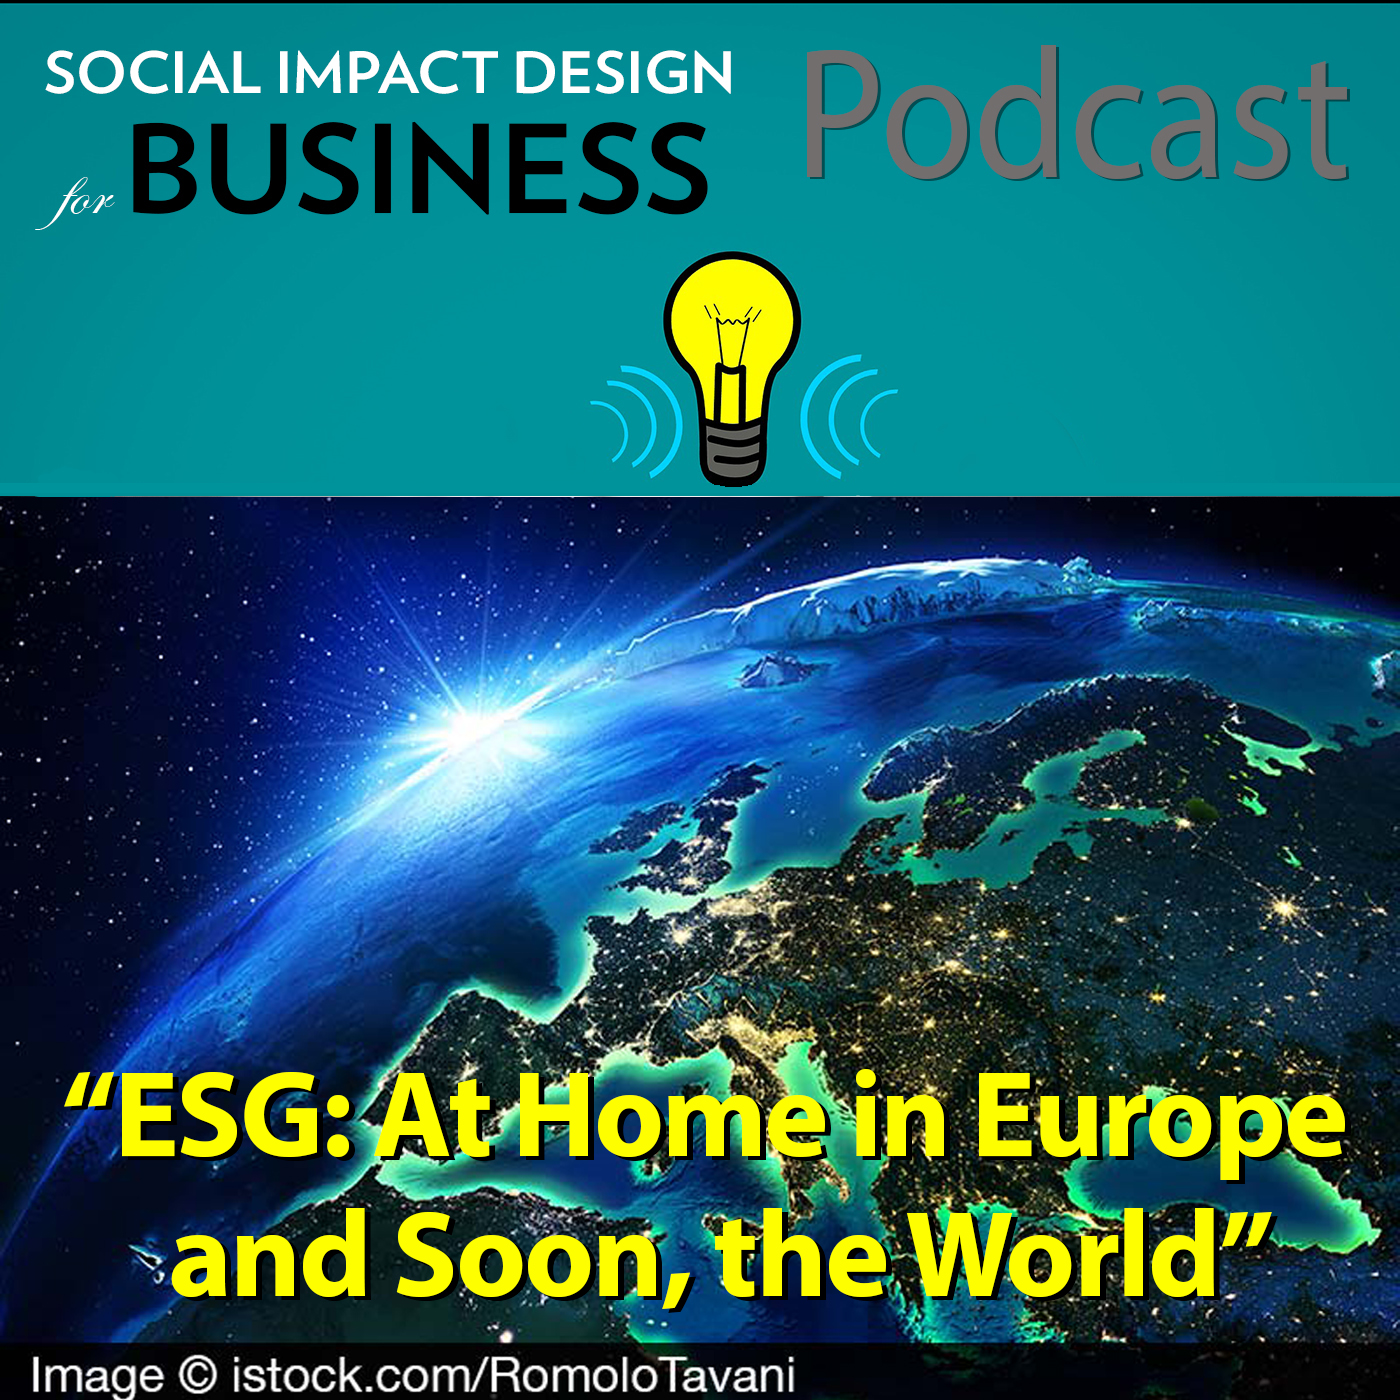 Podcast: ESG — At Home in Europe and Soon, the World